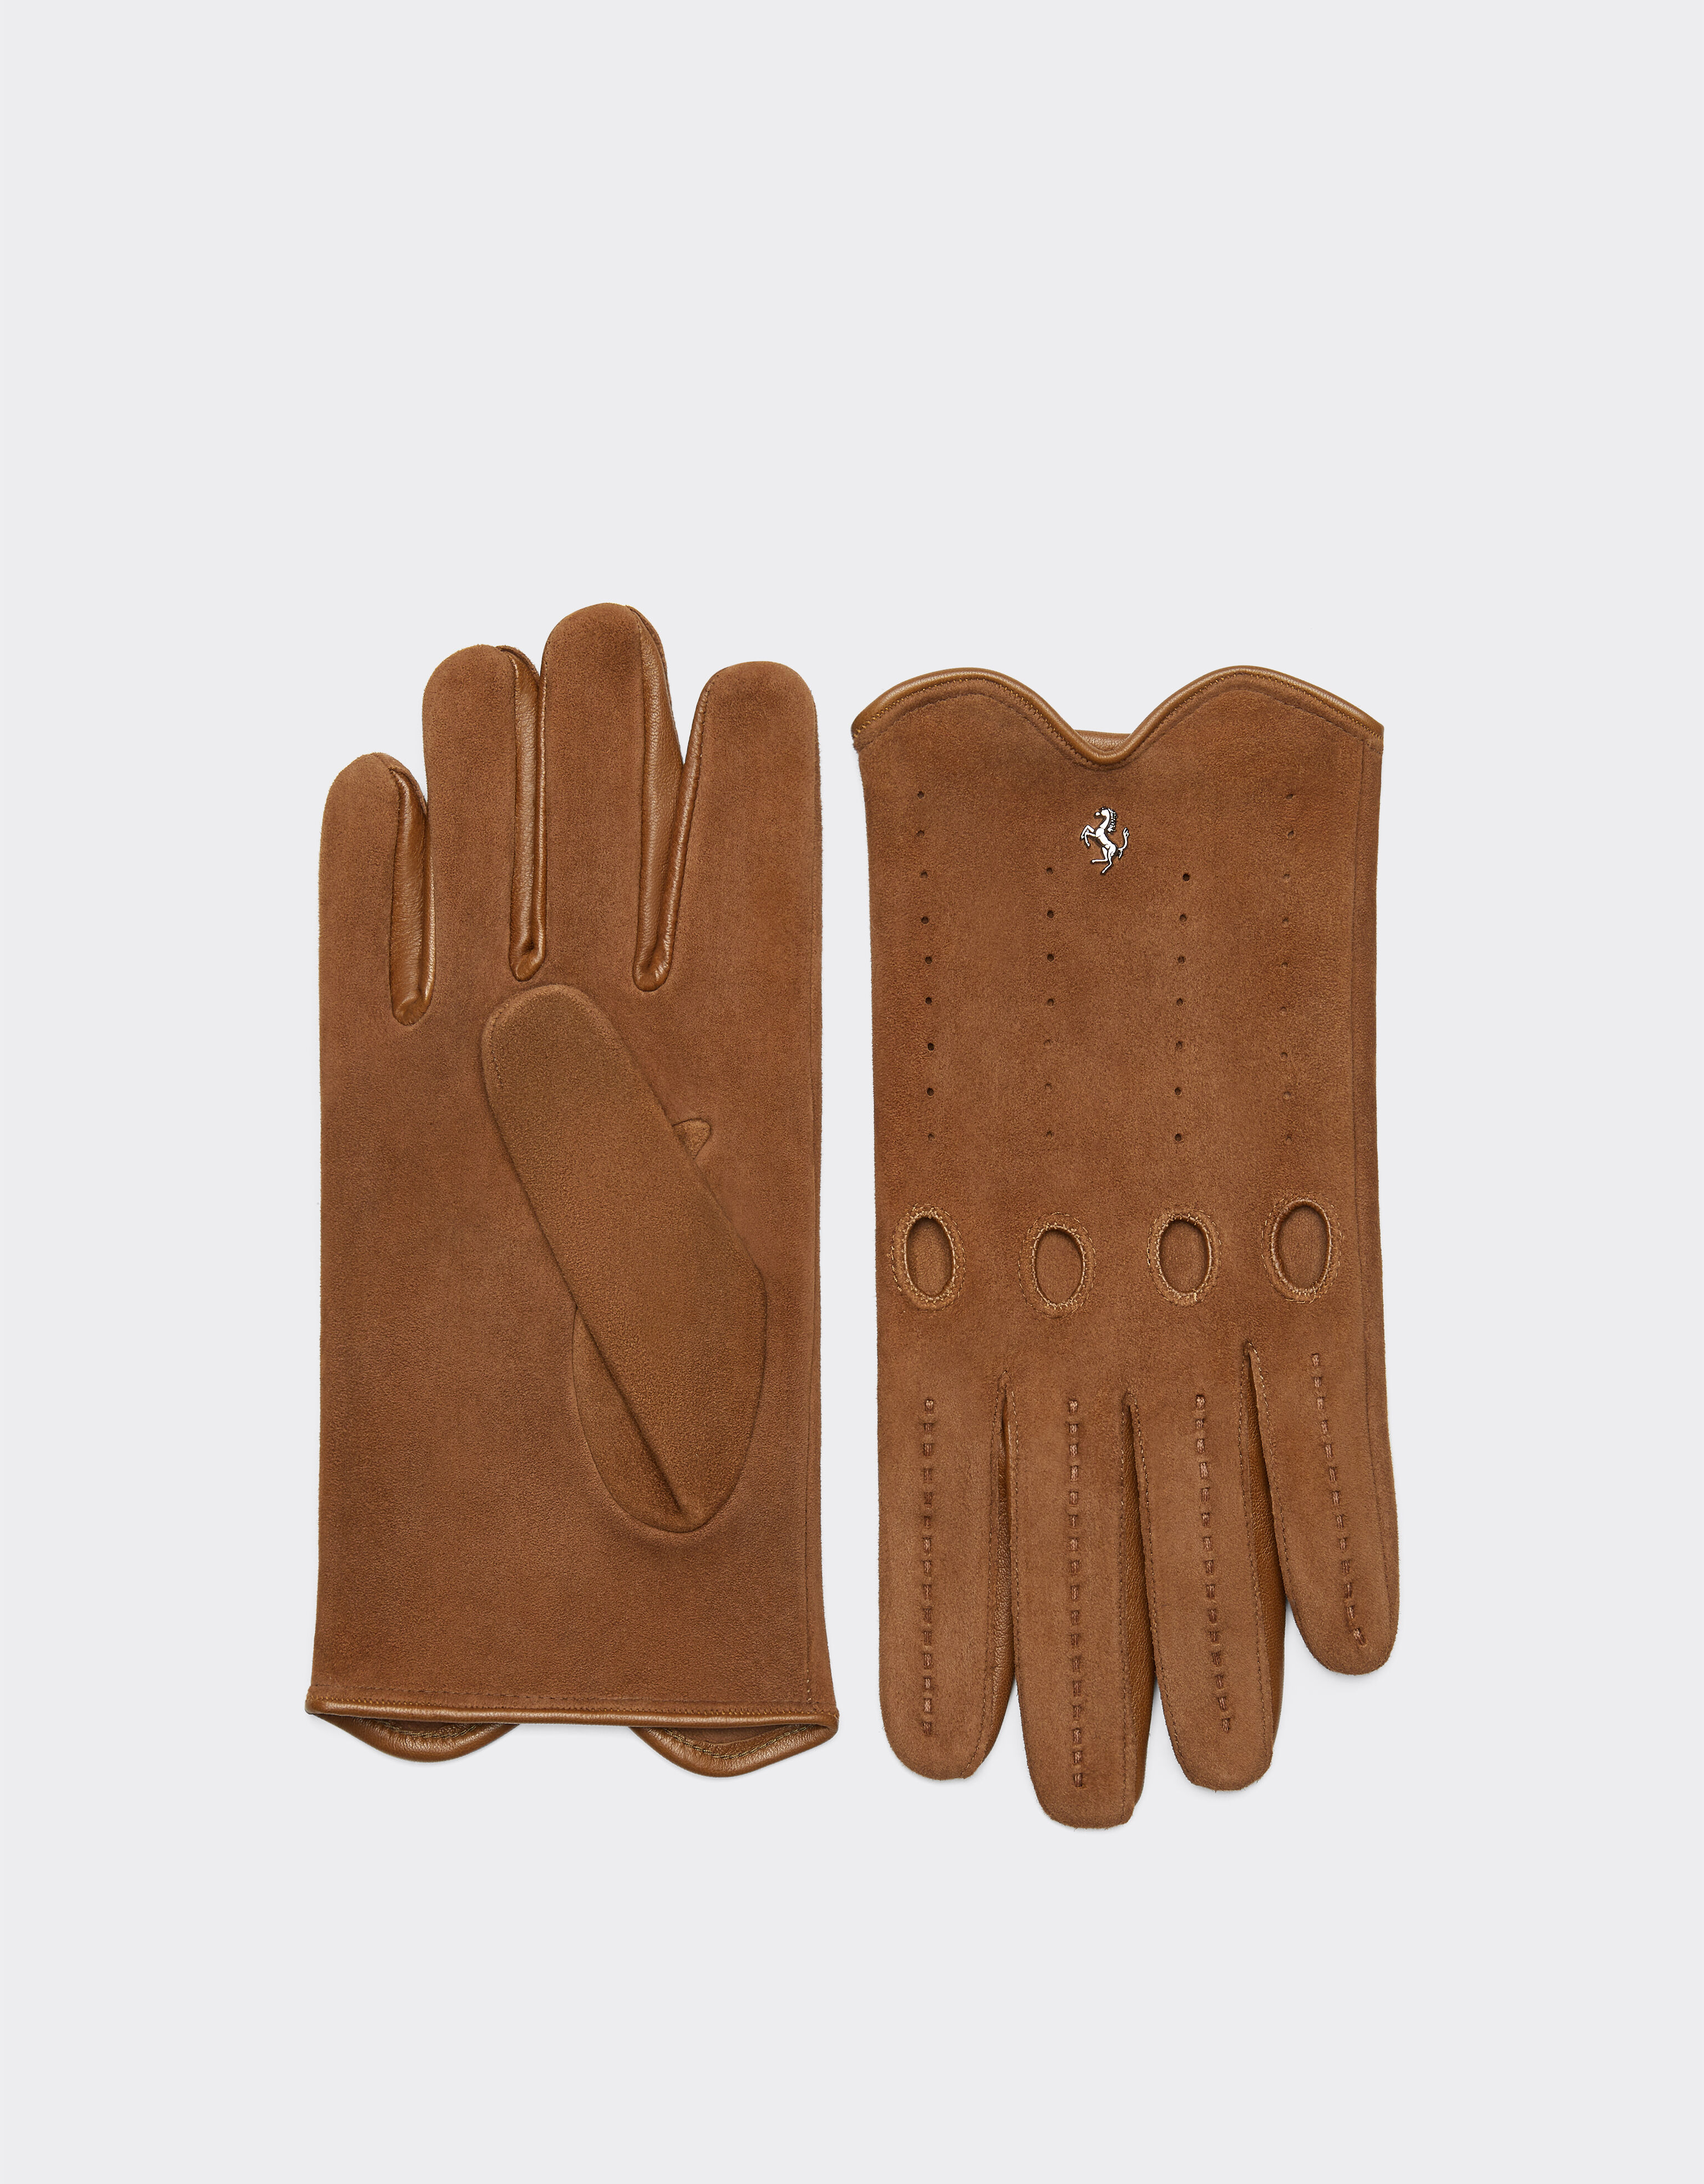 Ferrari Driving gloves in nappa leather and suede Charcoal 20010f